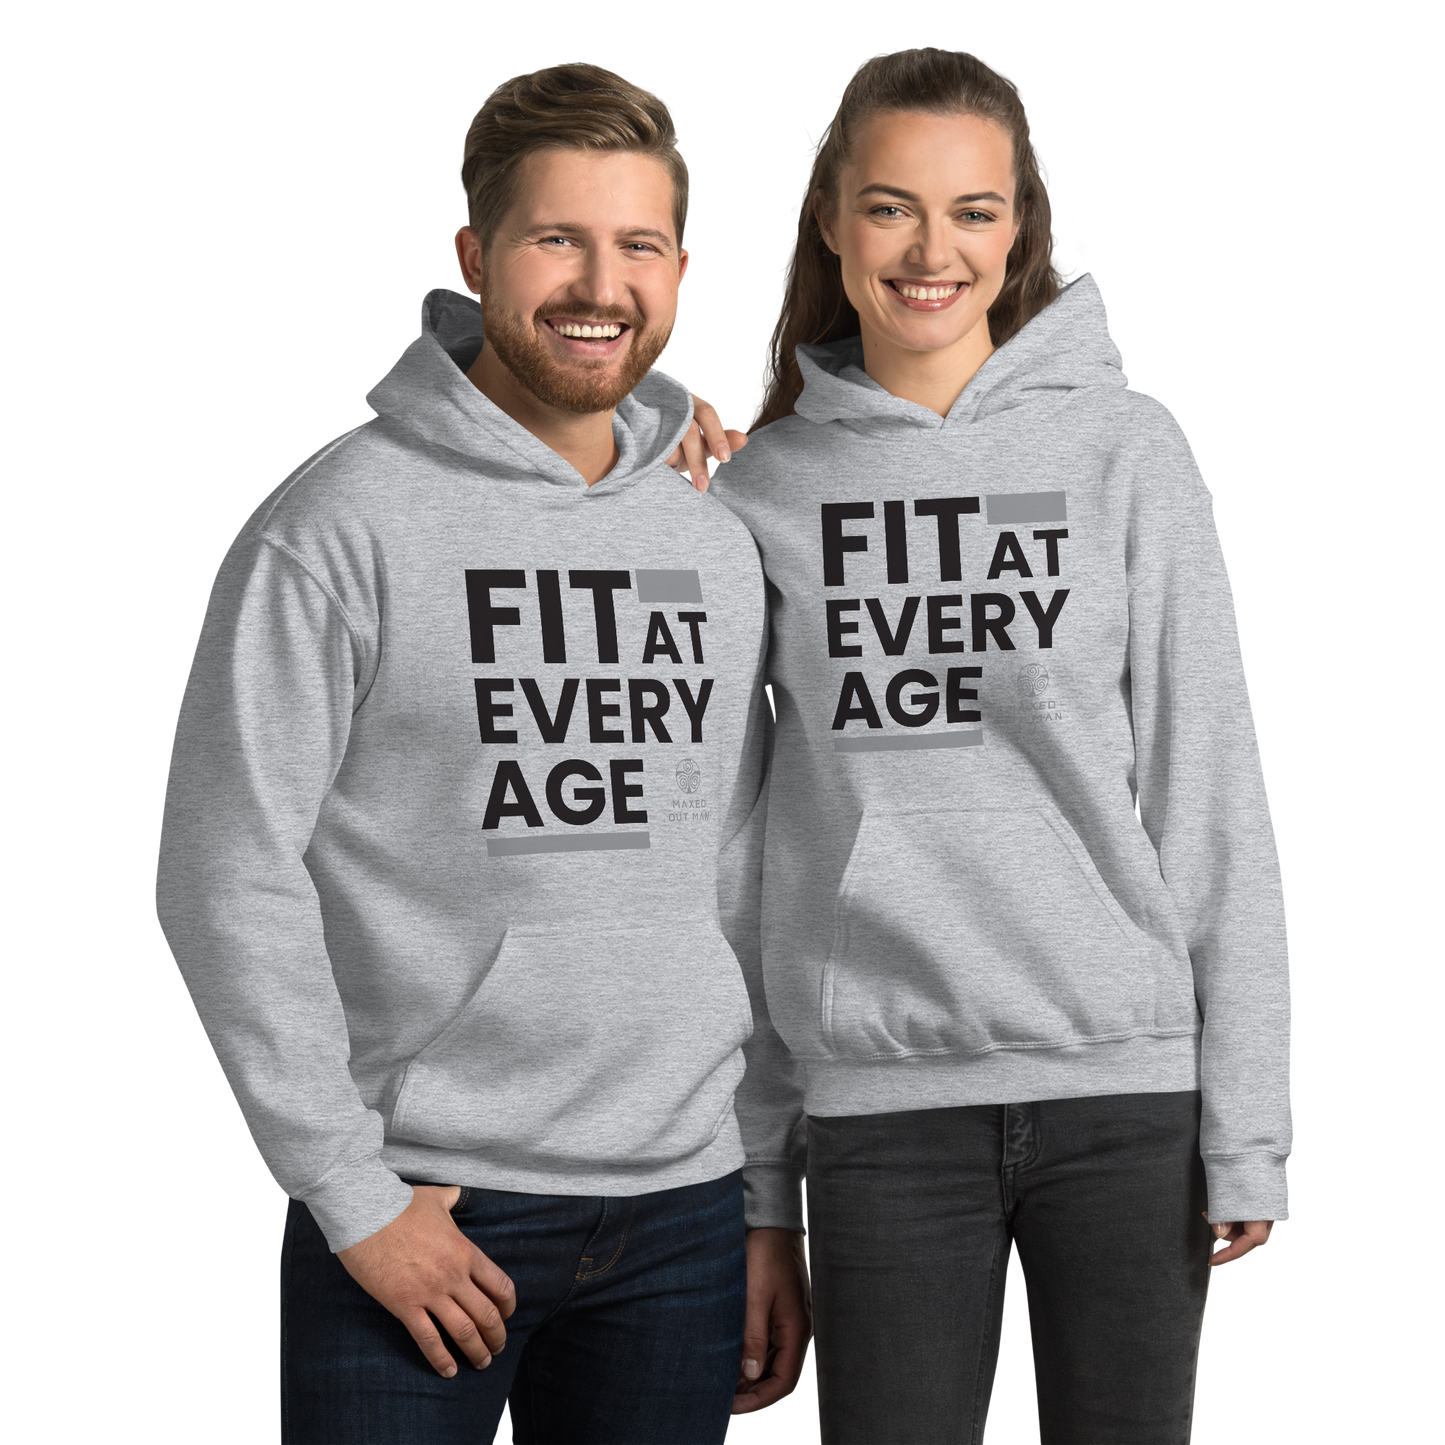 Fit at Every Age Unisex Hoodie - Lighter Colors